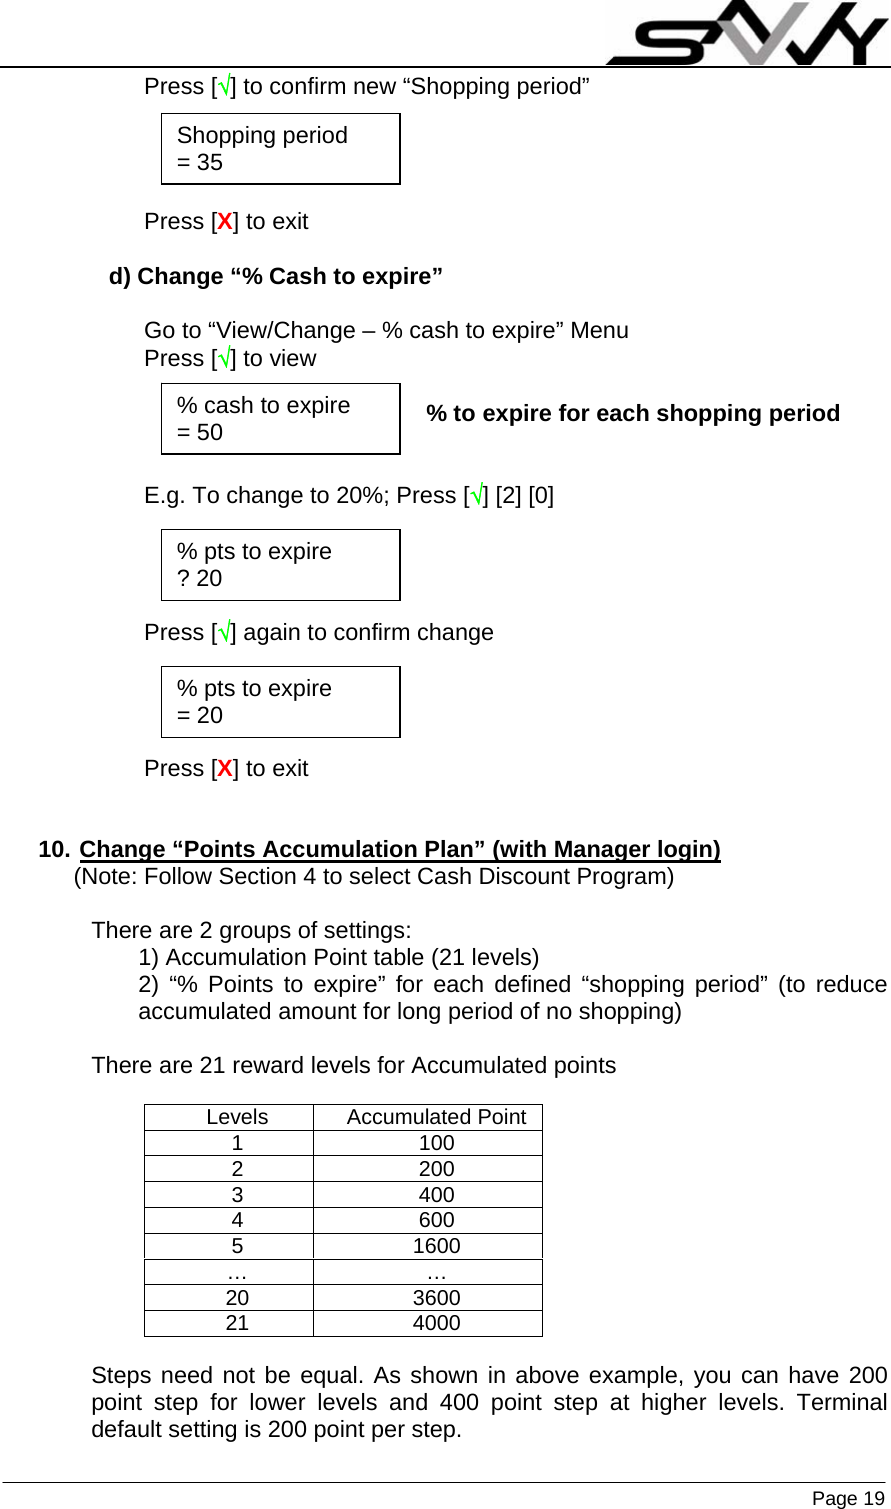                    Page 19  Press [√] to confirm new “Shopping period”     Press [X] to exit  d) Change “% Cash to expire”  Go to “View/Change – % cash to expire” Menu Press [√] to view  % to expire for each shopping period   E.g. To change to 20%; Press [√] [2] [0]     Press [√] again to confirm change     Press [X] to exit   10. Change “Points Accumulation Plan” (with Manager login) (Note: Follow Section 4 to select Cash Discount Program)  There are 2 groups of settings: 1) Accumulation Point table (21 levels) 2) “% Points to expire” for each defined “shopping period” (to reduce accumulated amount for long period of no shopping)  There are 21 reward levels for Accumulated points    Steps need not be equal. As shown in above example, you can have 200 point step for lower levels and 400 point step at higher levels. Terminal default setting is 200 point per step. Levels Accumulated Point 1 100 2 200 3 400 4 600 5 1600 … … 20 3600 21 4000 % cash to expire = 50 % pts to expire ? 20 % pts to expire = 20 Shopping period = 35 